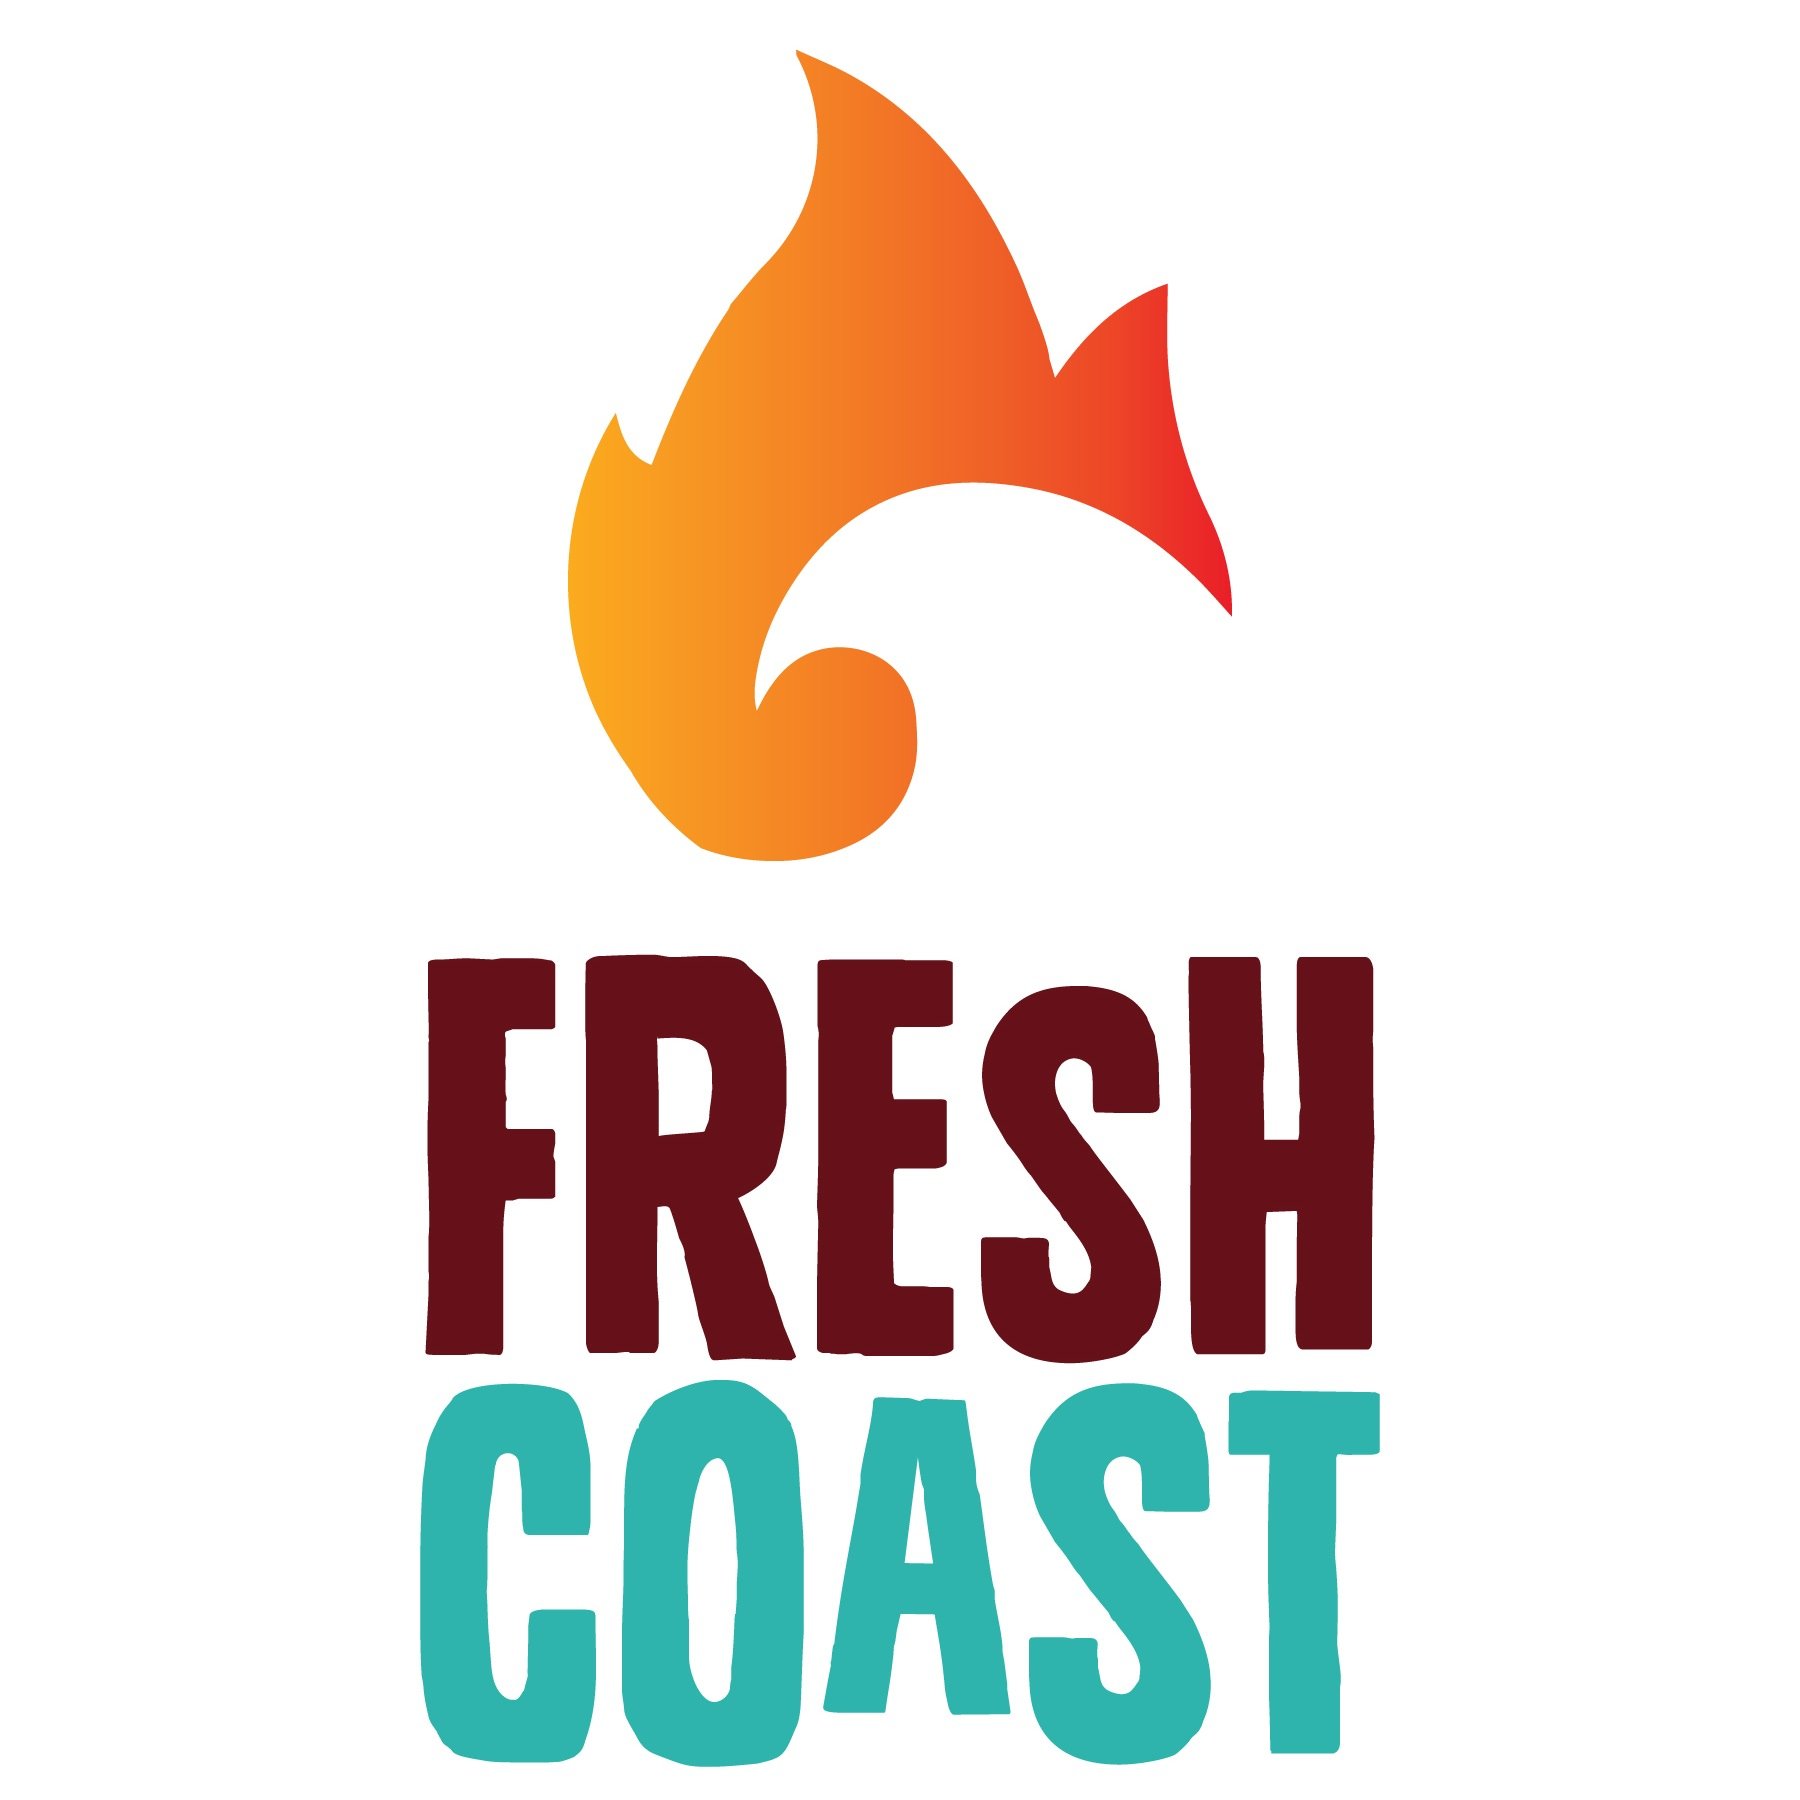 Started in 2010 in Indianapolis called West Coast Tacos, Fresh Coast Tacos brings off the grill meats with an Asian twist in Mexican flatbreads